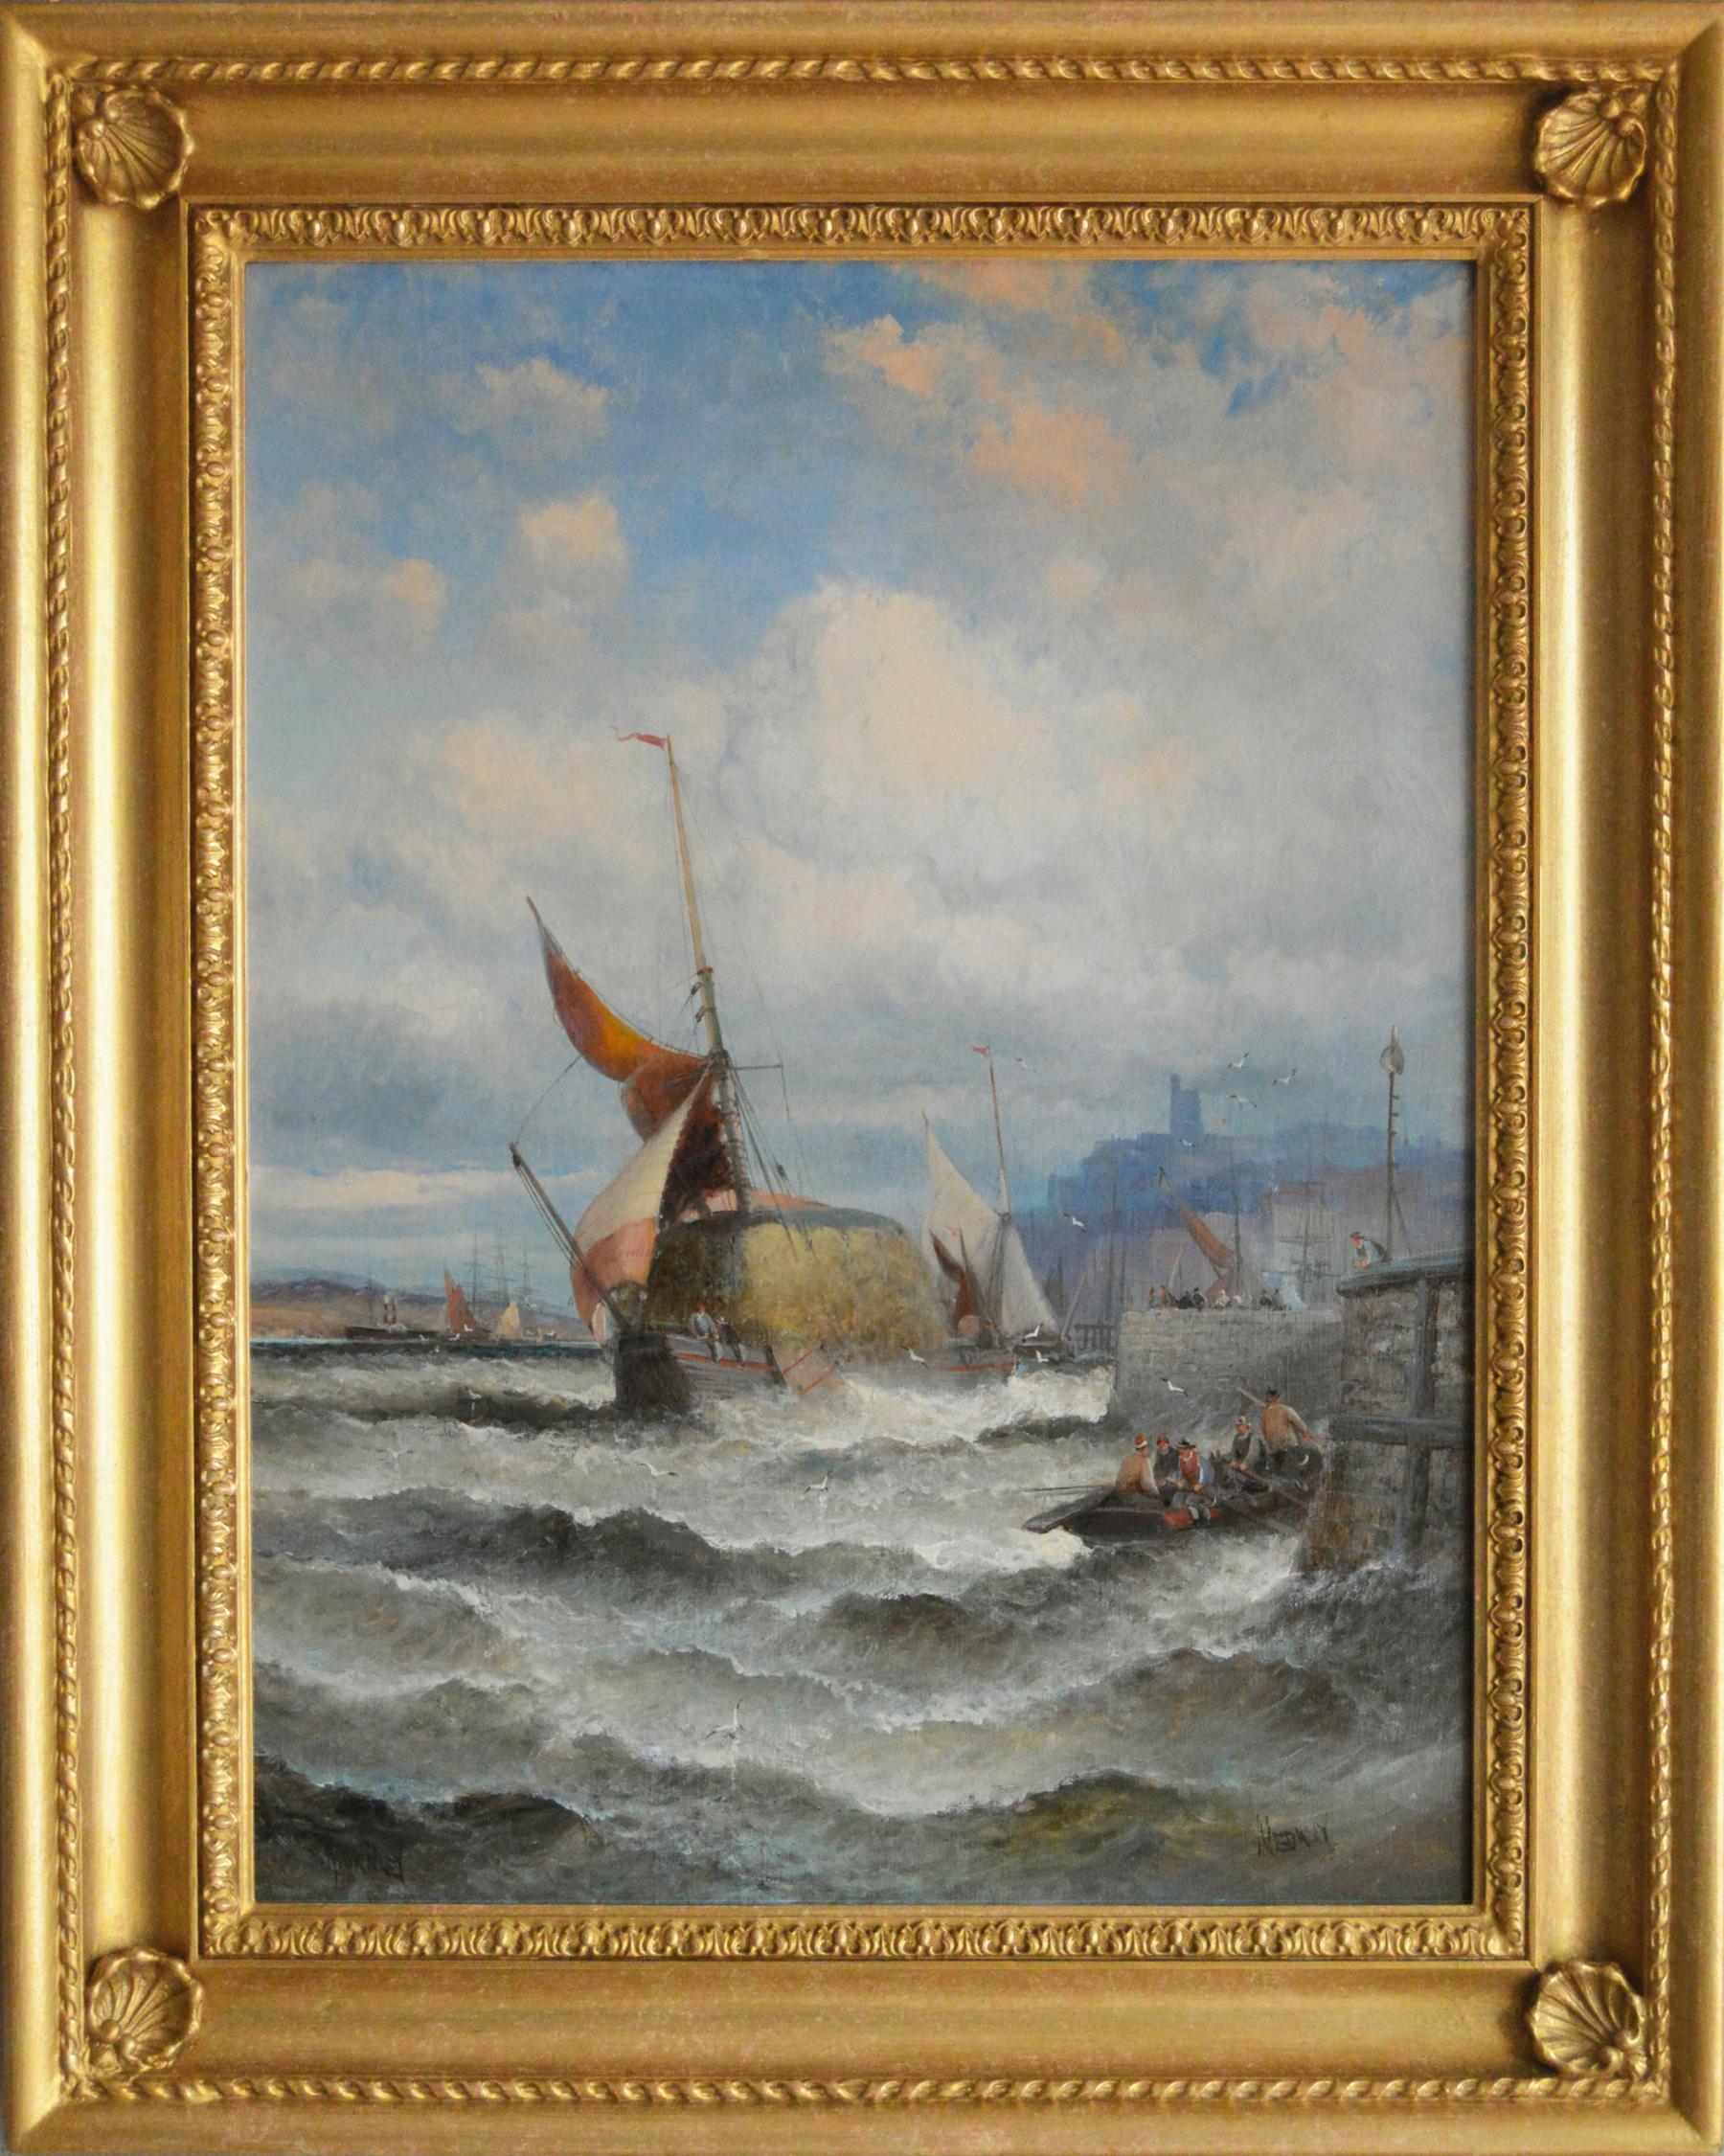 19th Century seascape oil painting of a hay barge on the Medway